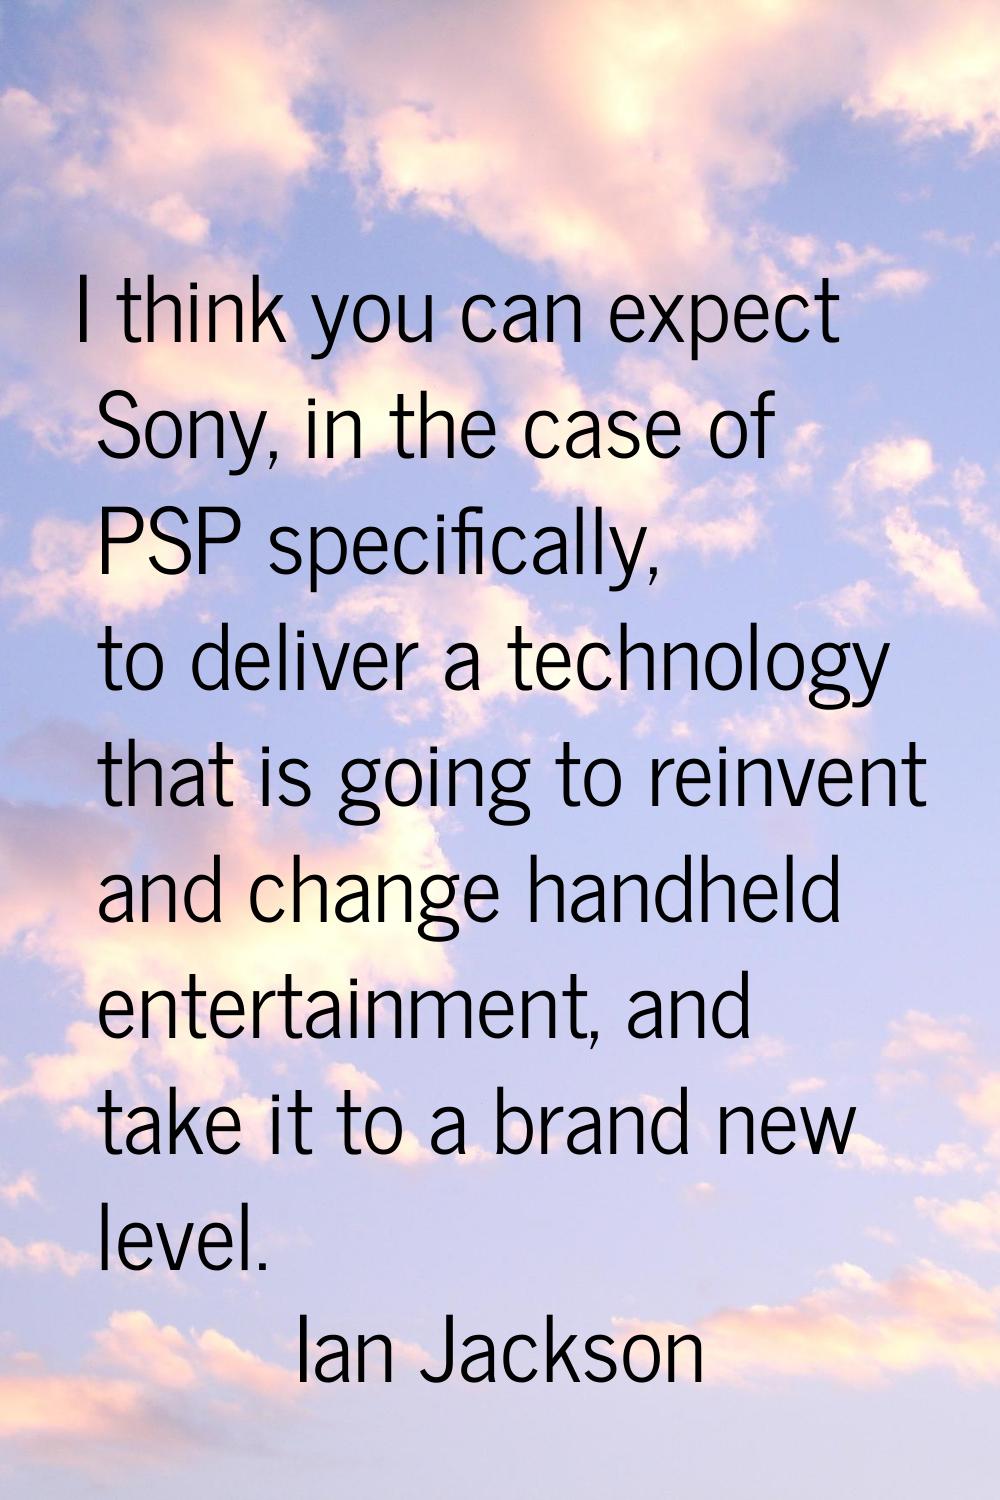 I think you can expect Sony, in the case of PSP specifically, to deliver a technology that is going